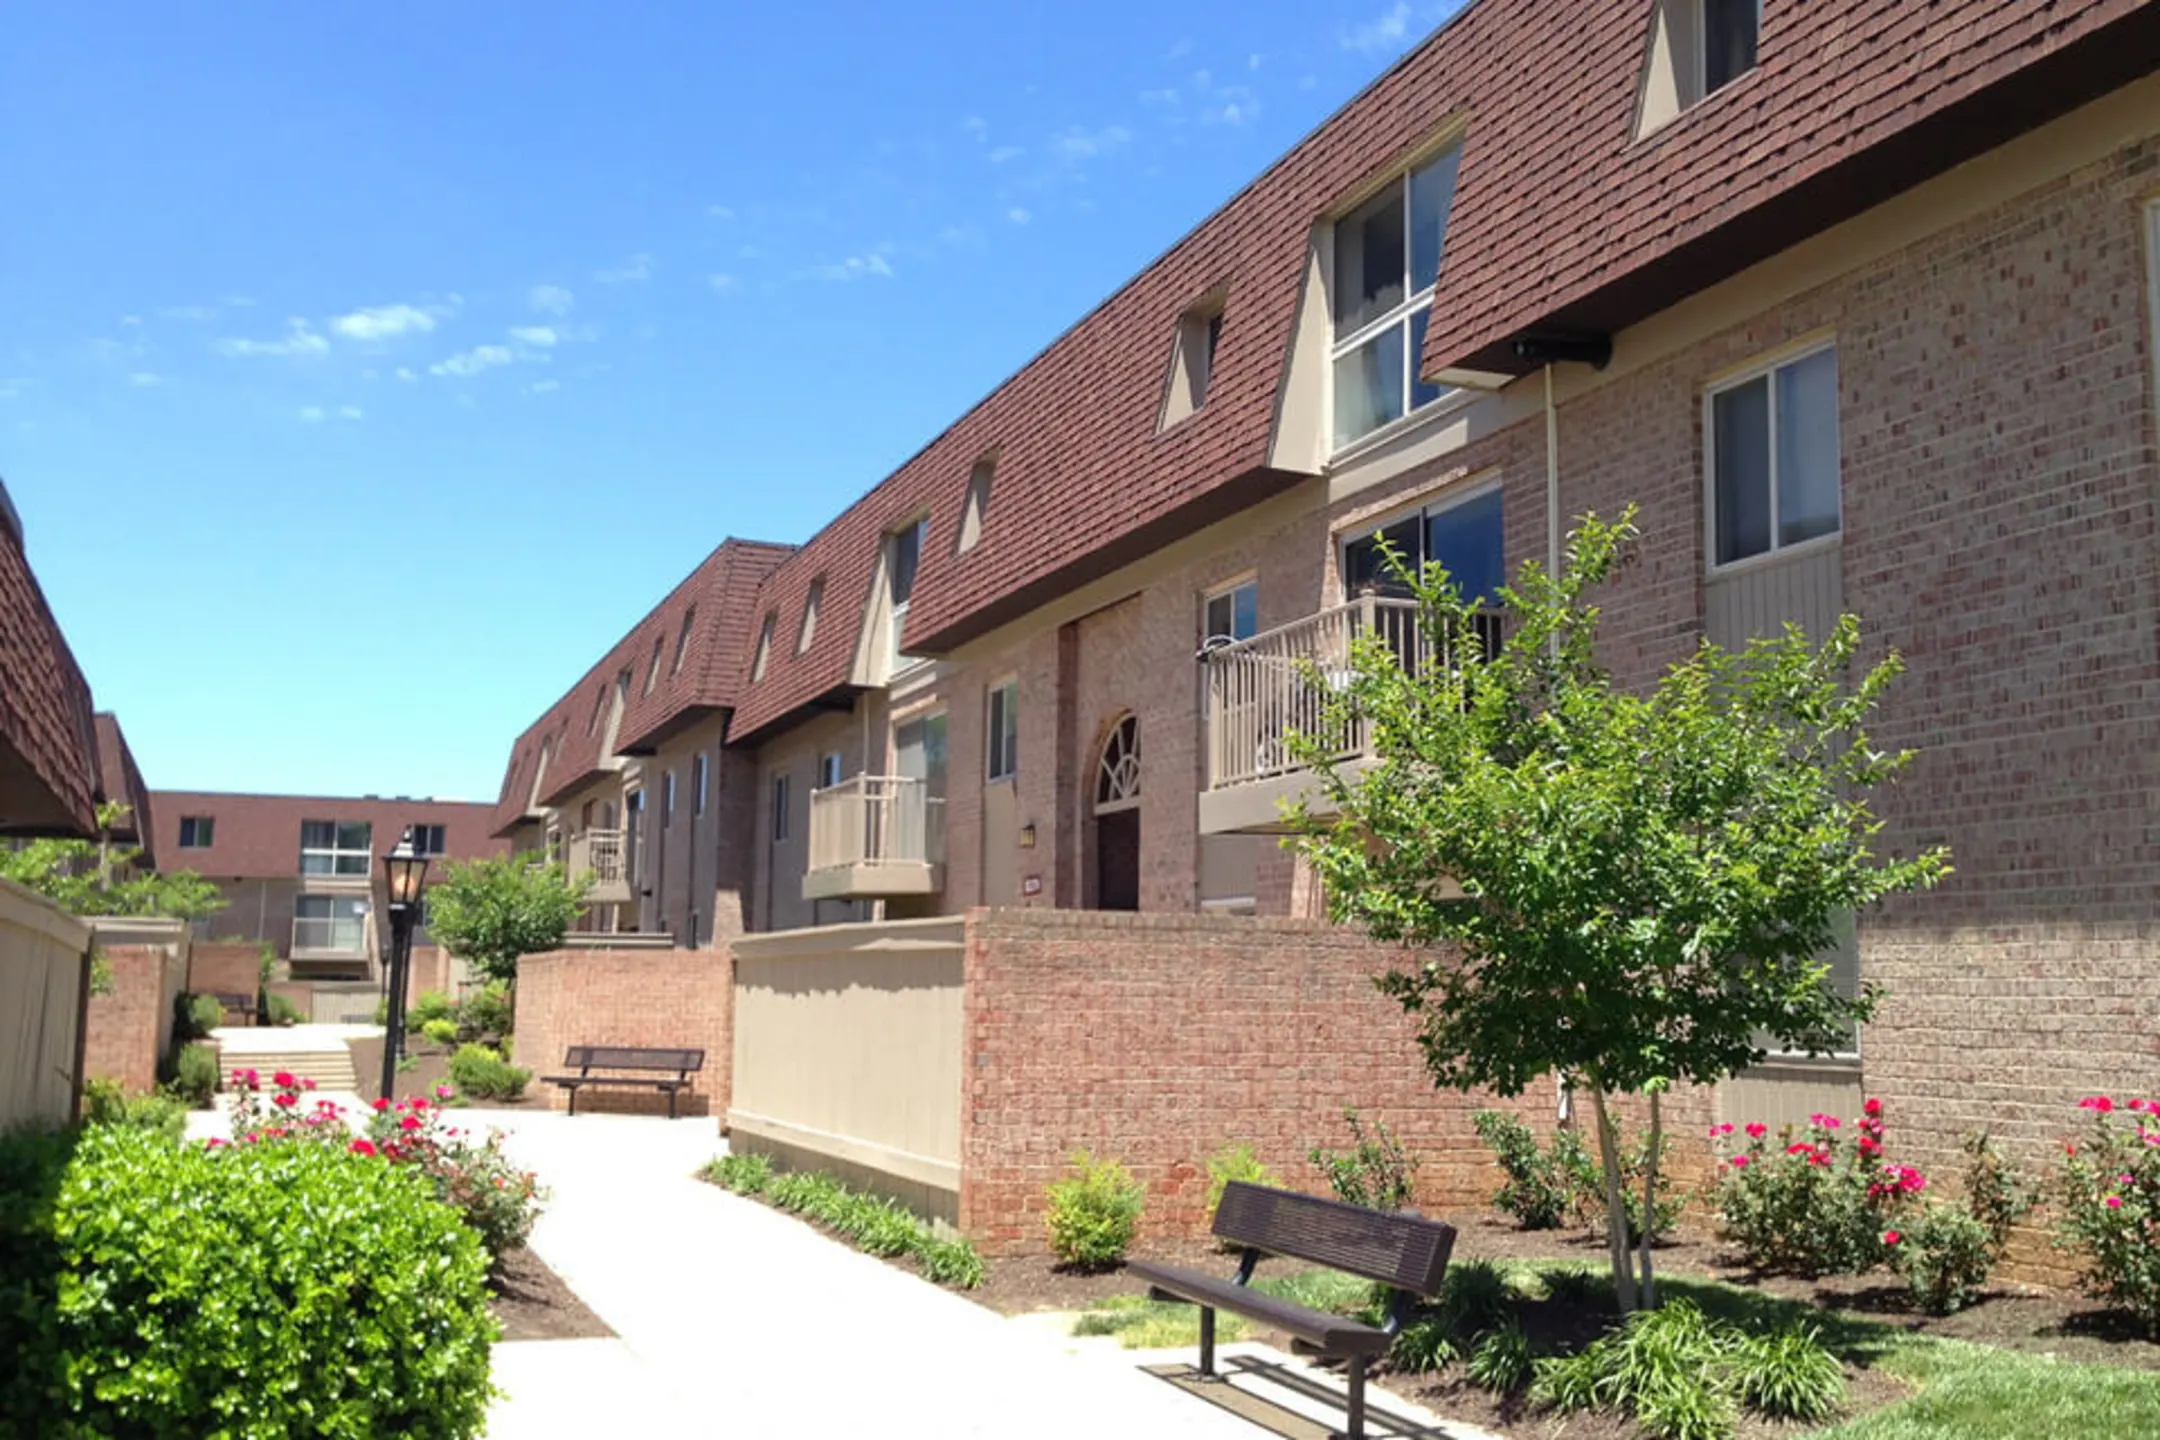 Building - Cider Mill Apartments - Montgomery Village, MD